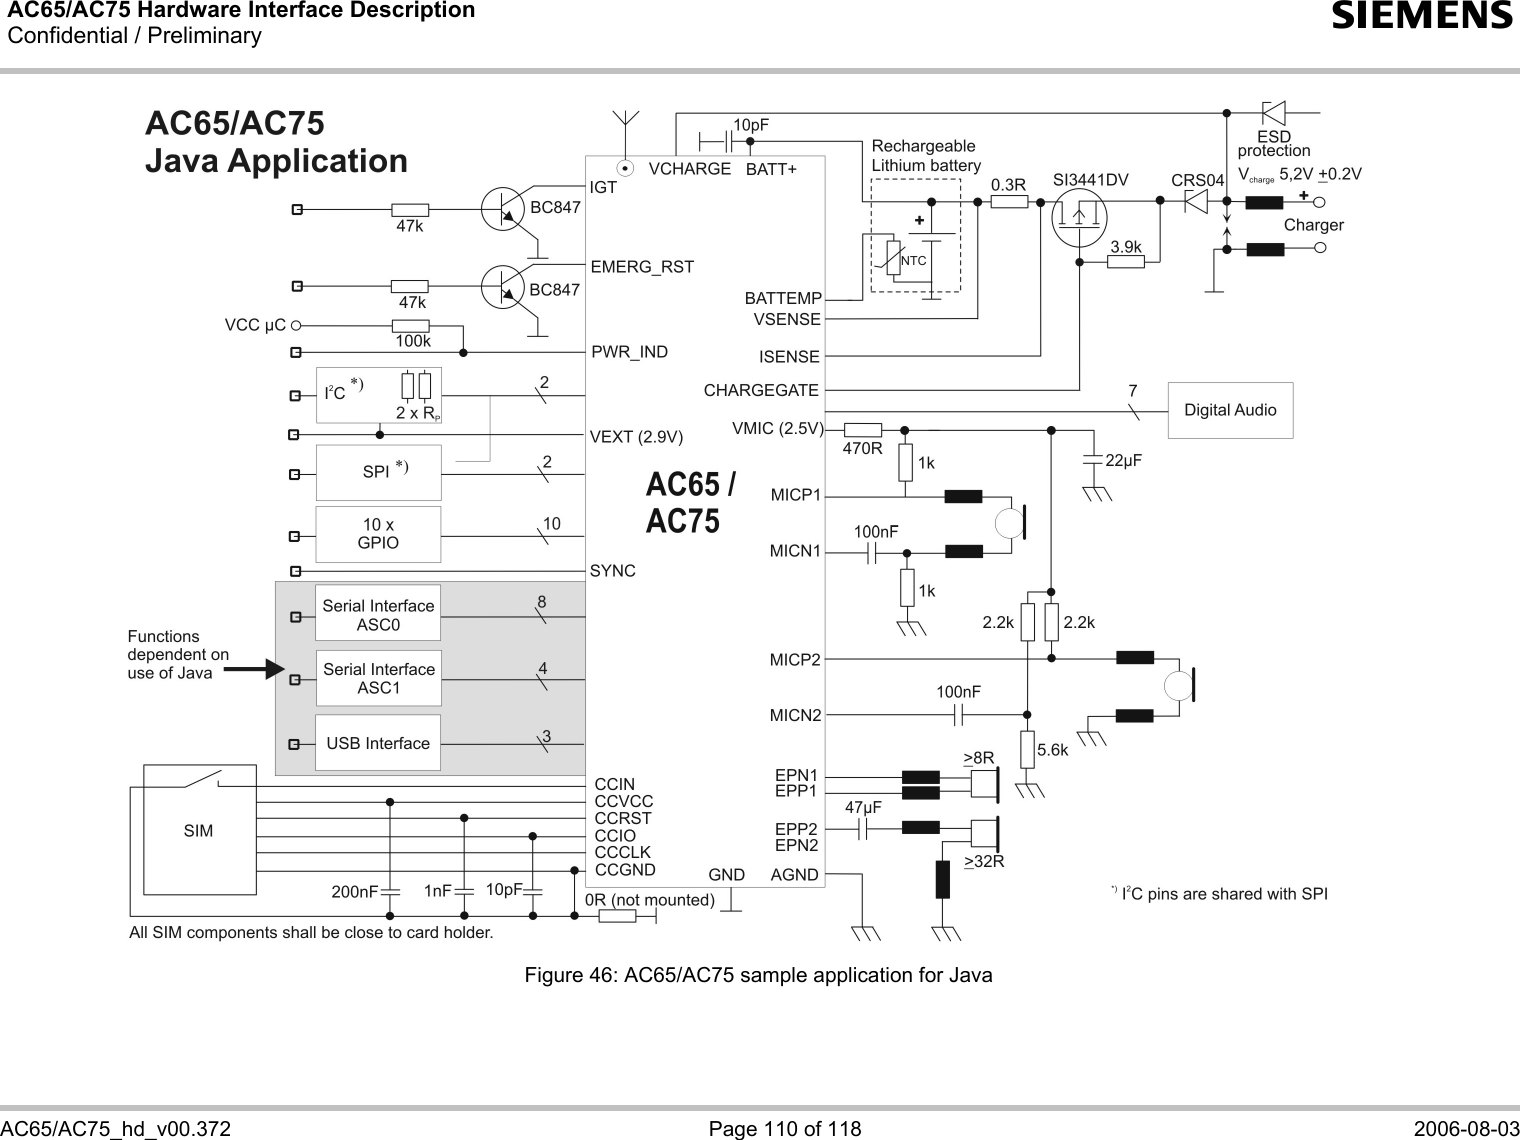 AC65/AC75 Hardware Interface Description Confidential / Preliminary  s   AC65/AC75_hd_v00.372  Page 110 of 118  2006-08-03  Figure 46: AC65/AC75 sample application for Java 